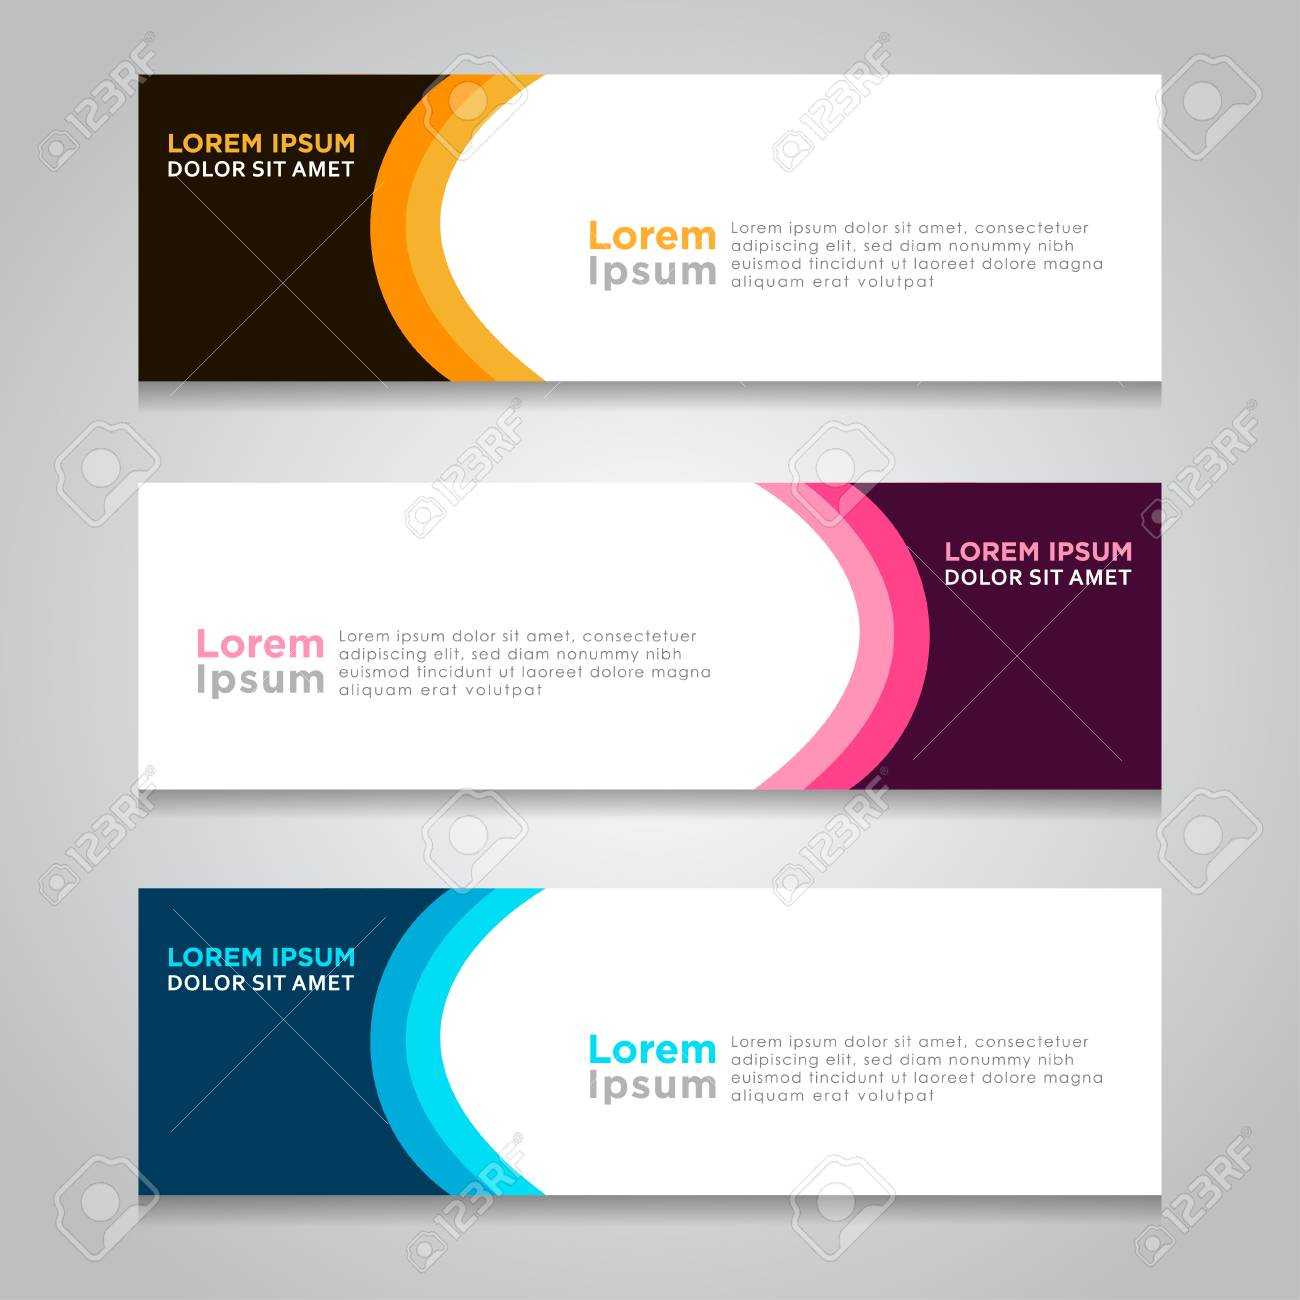 Abstract Web Banner Design Background Or Header Templates Throughout Website Banner Design Templates